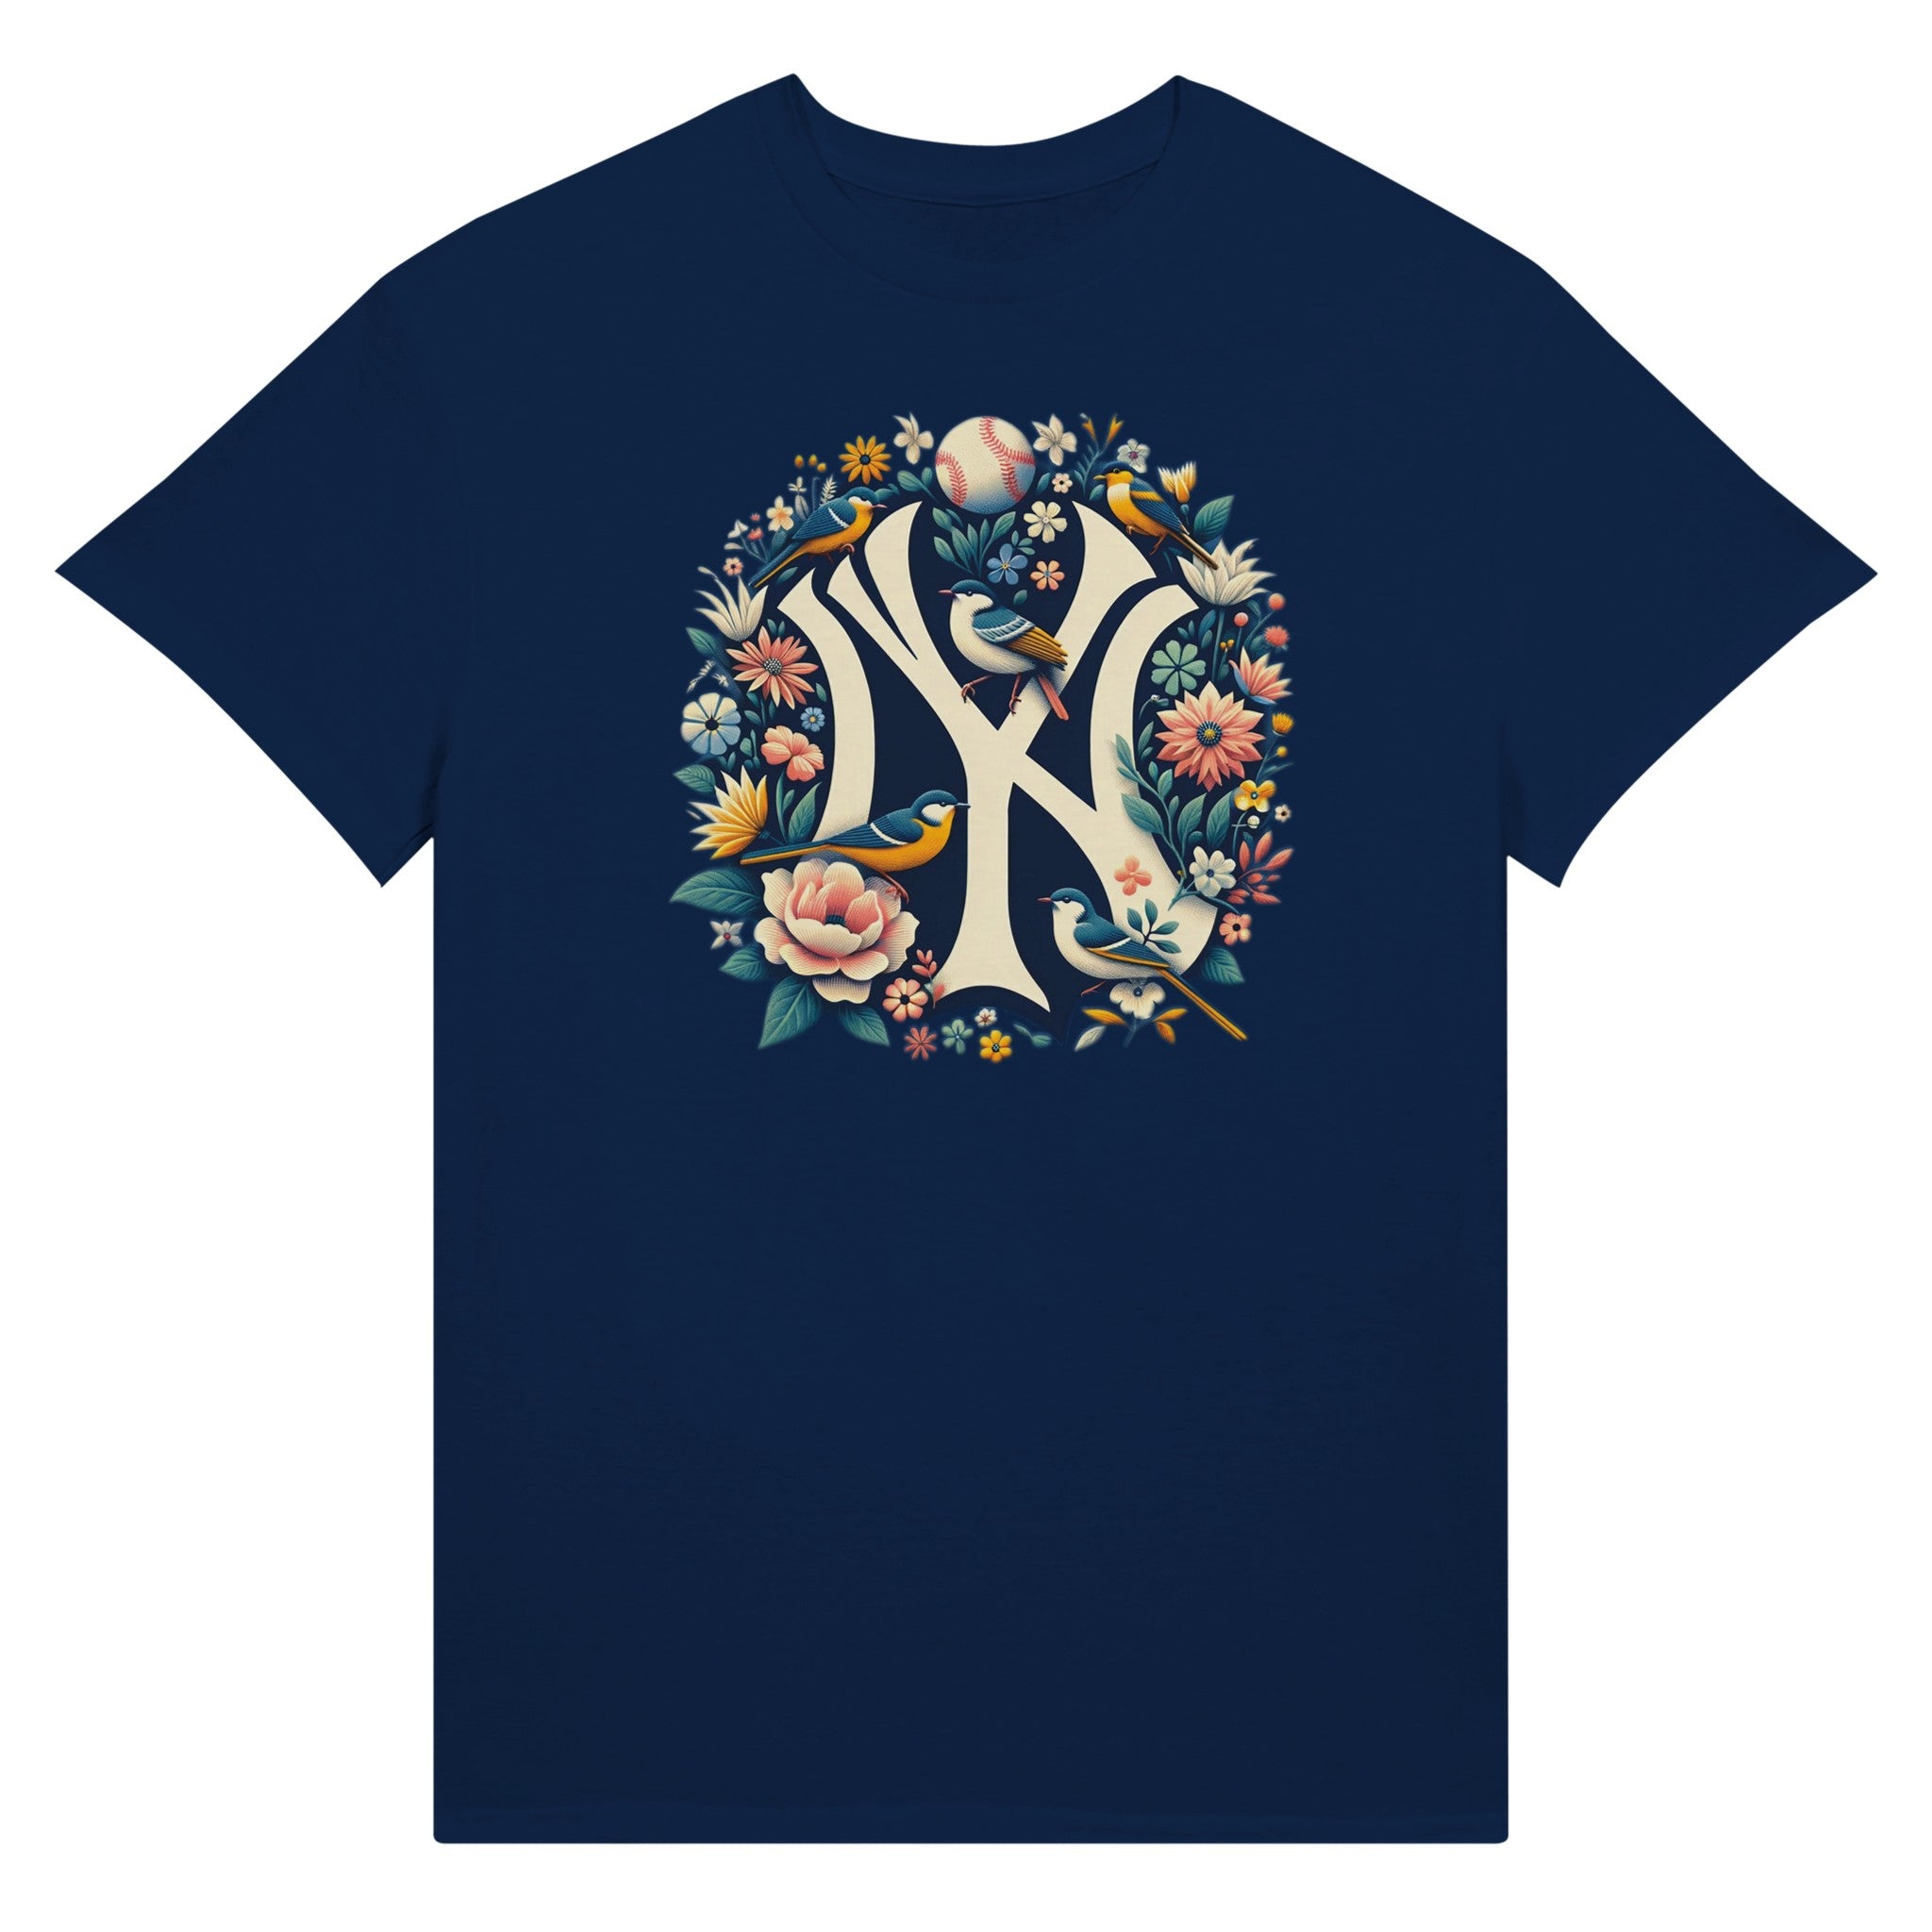 NY Floral Emblem Tee - Double R Rags